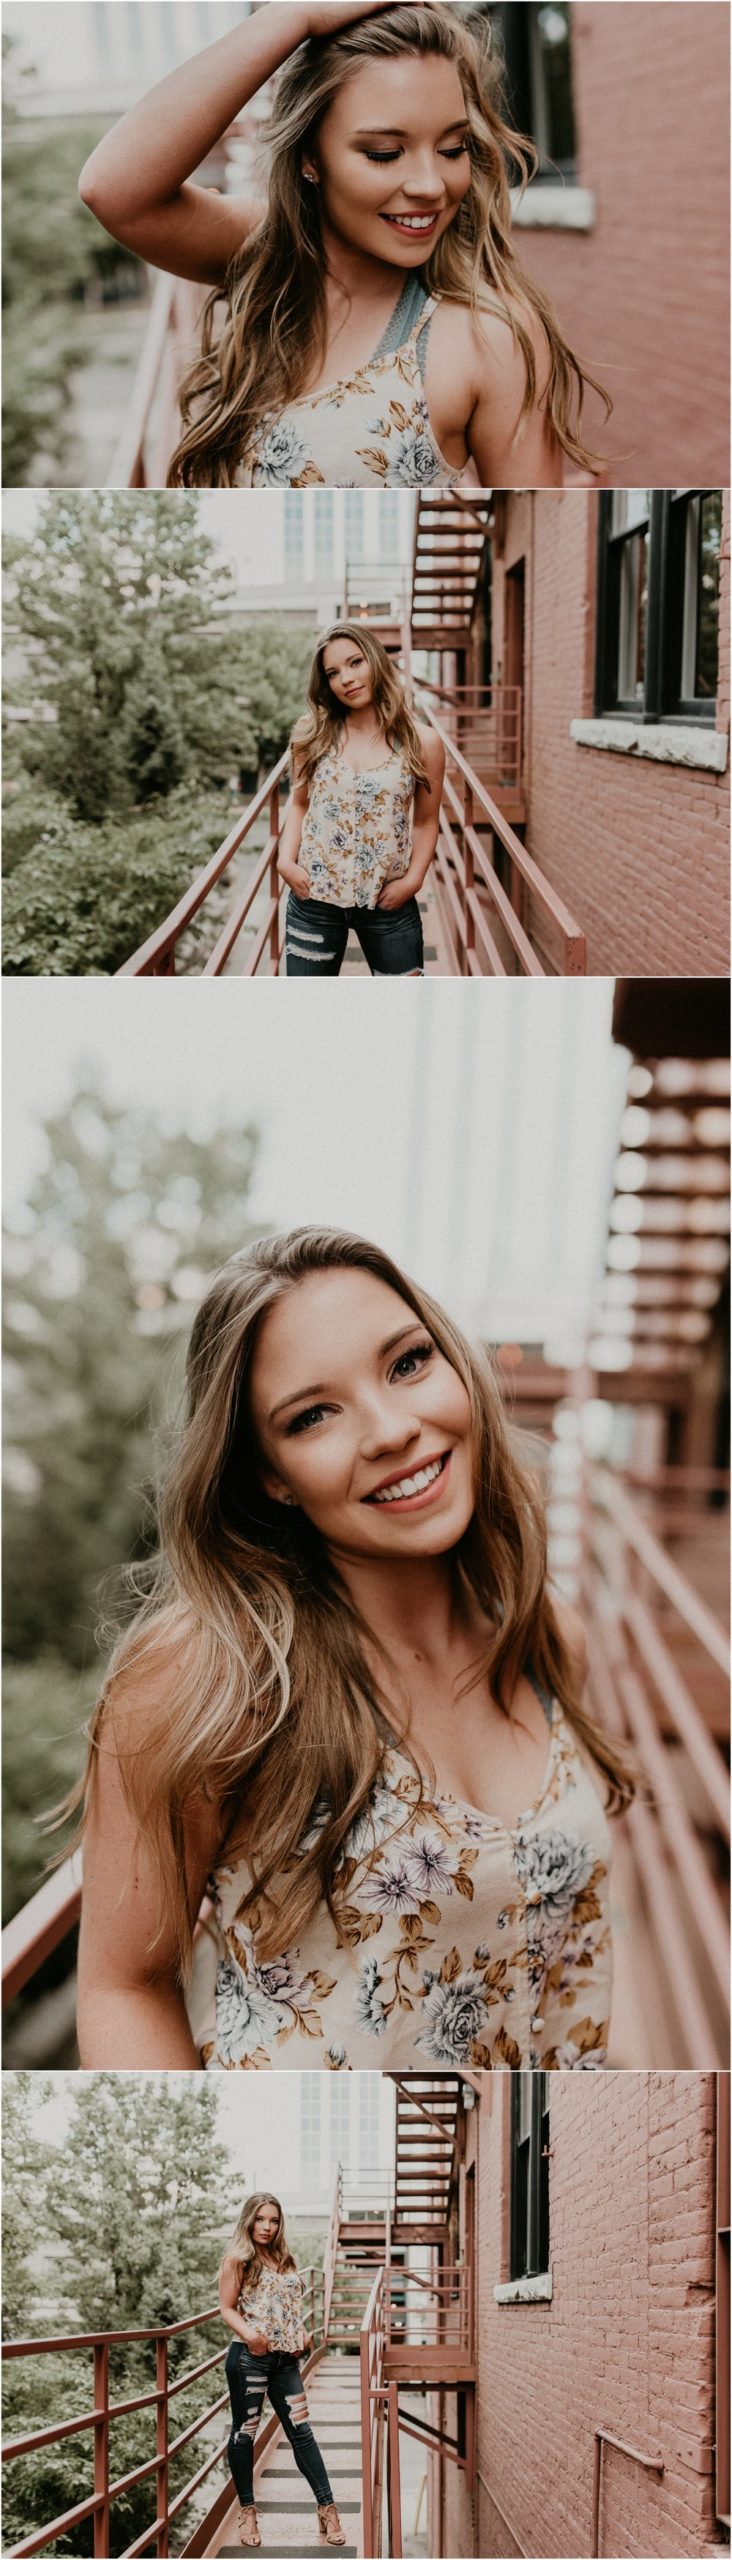 Makayla Madden Photography Boise Senior Photographer Fall Senior Pictures Urban Downtown Boise Outfit Location Ideas